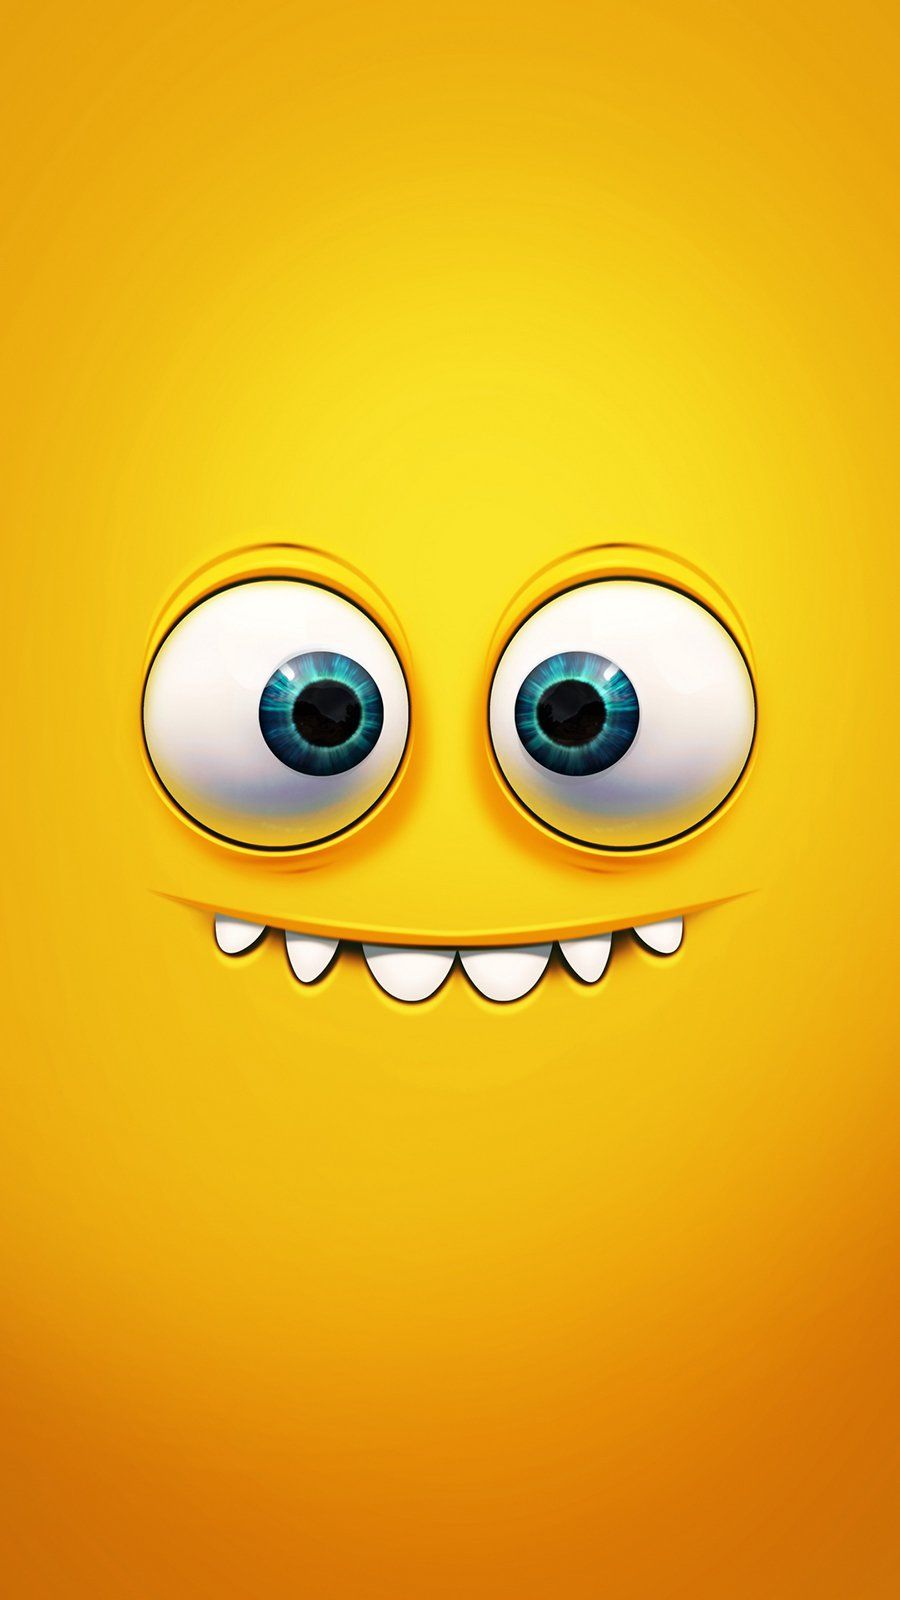 Yellow monster with big eyes and a smile - Emoji